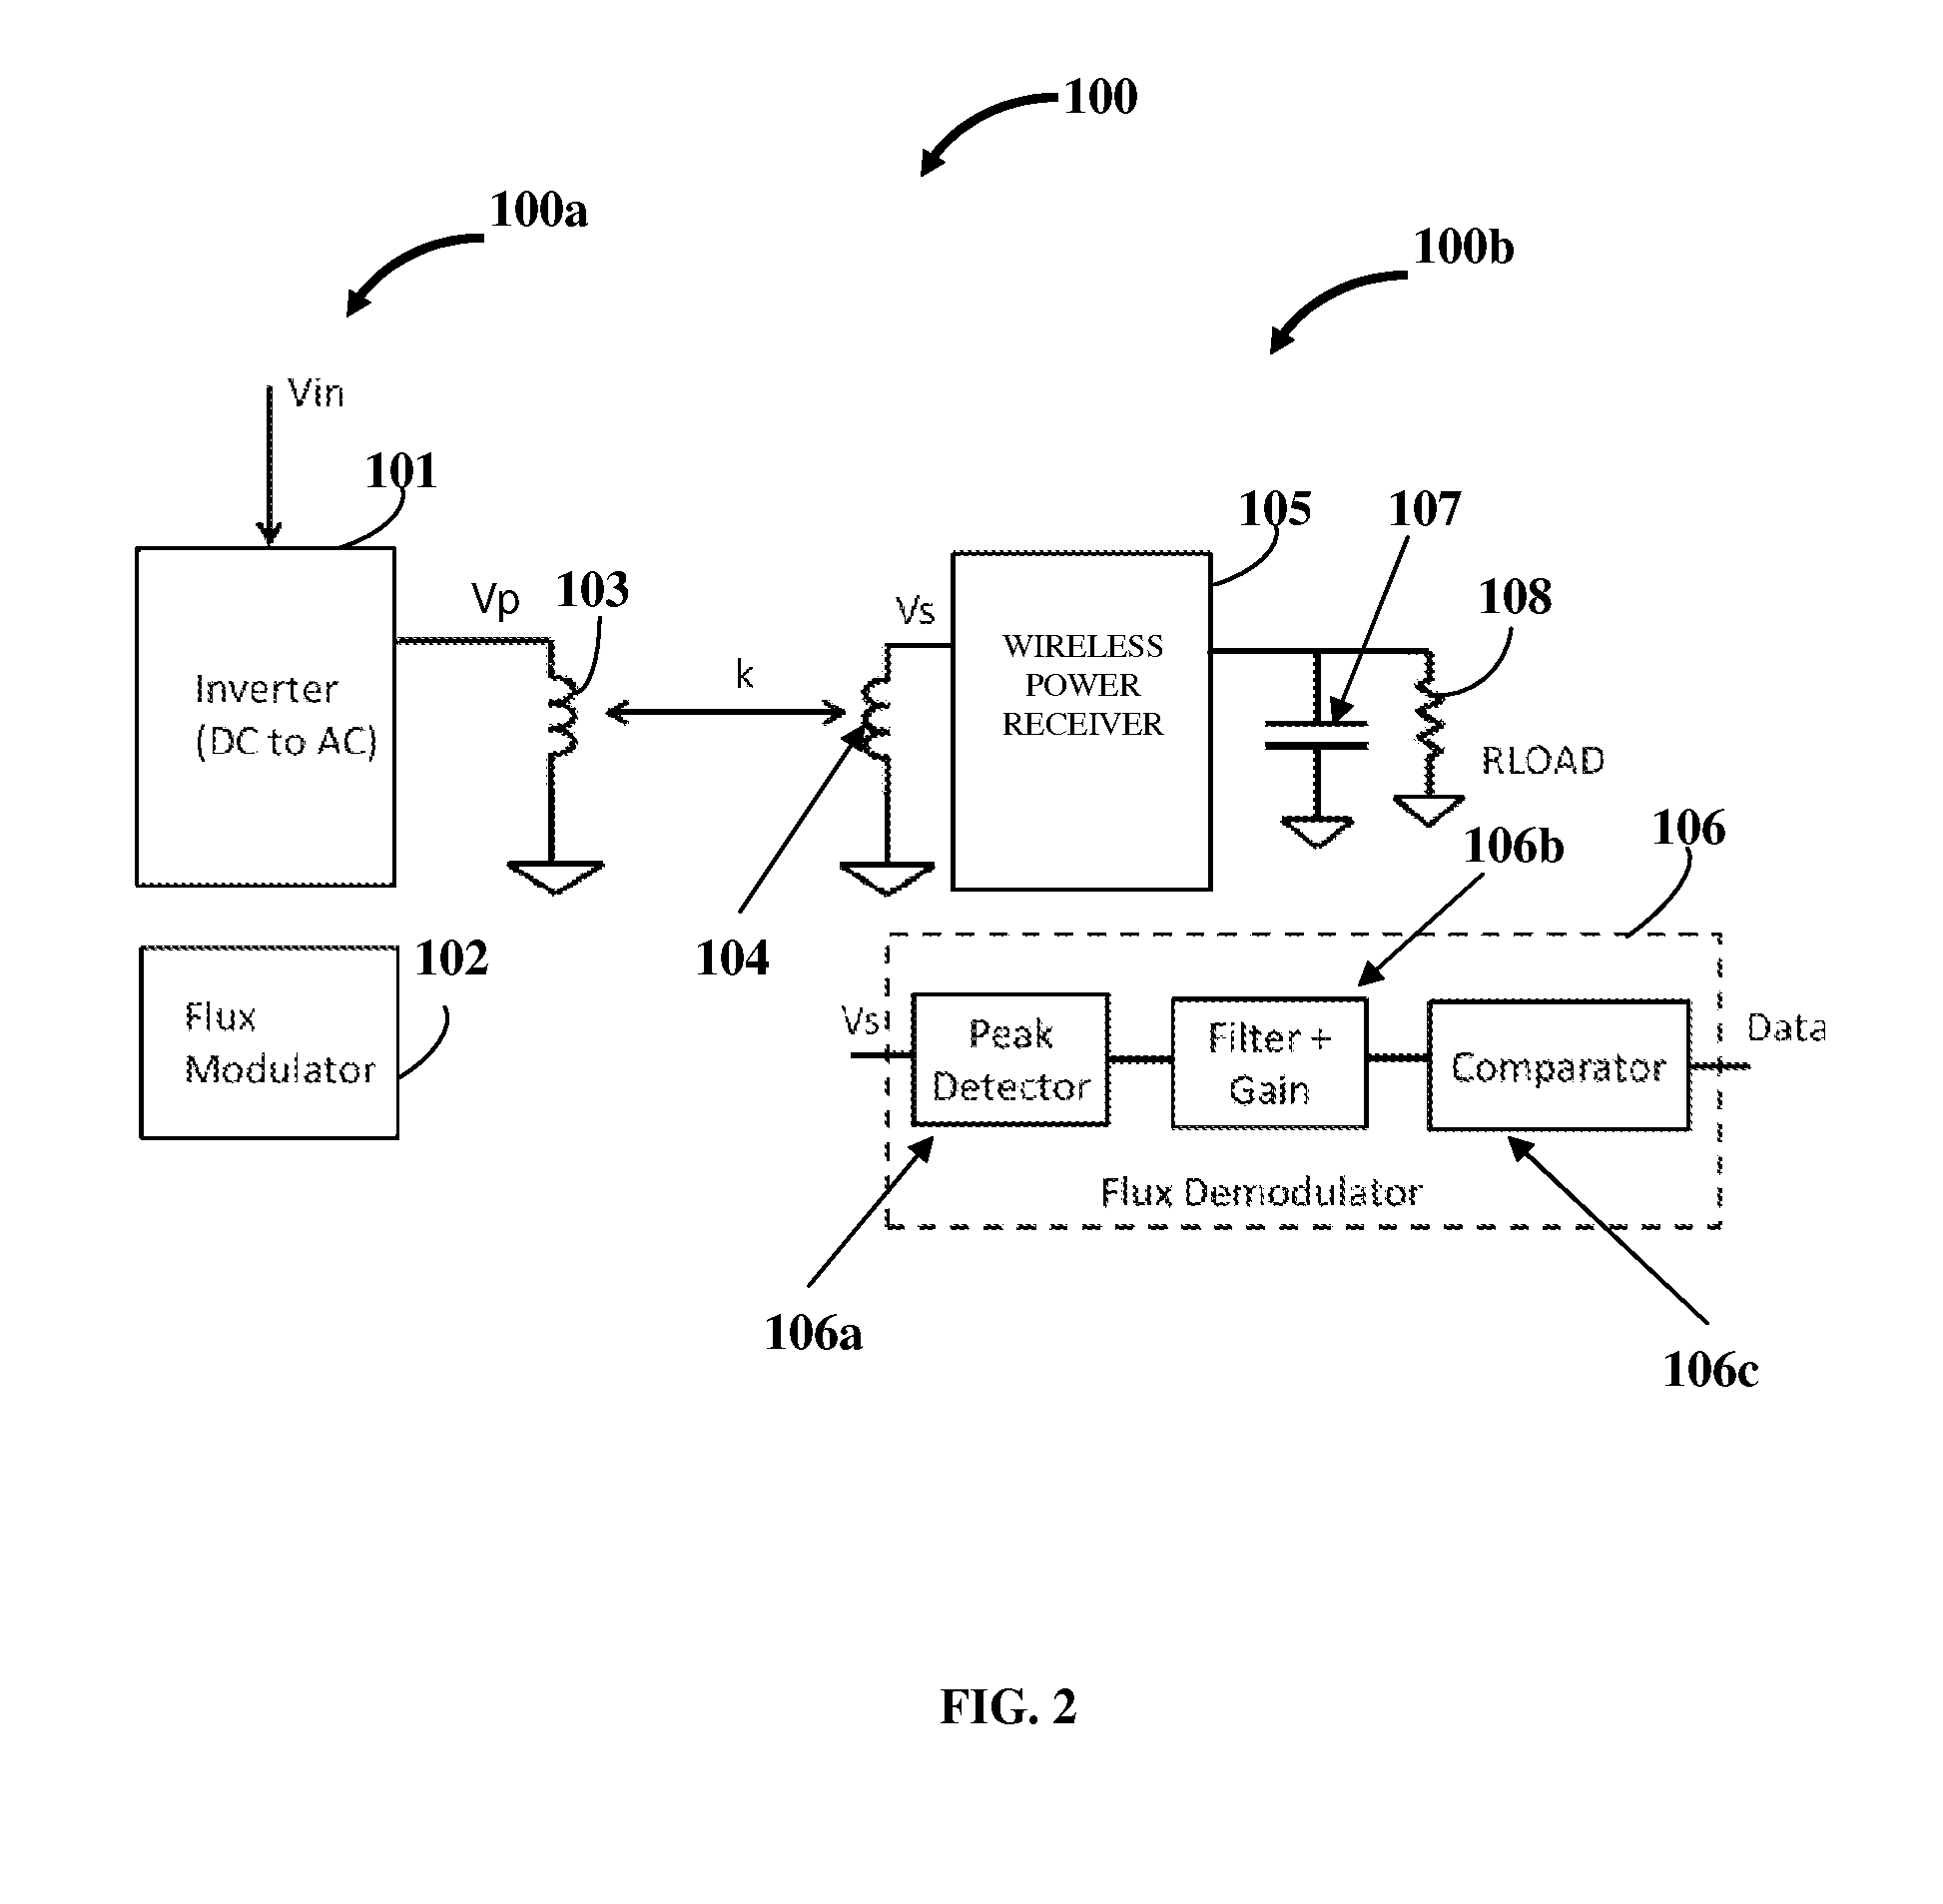 Transmitter To Receiver Communication Link In A Wireless Power System